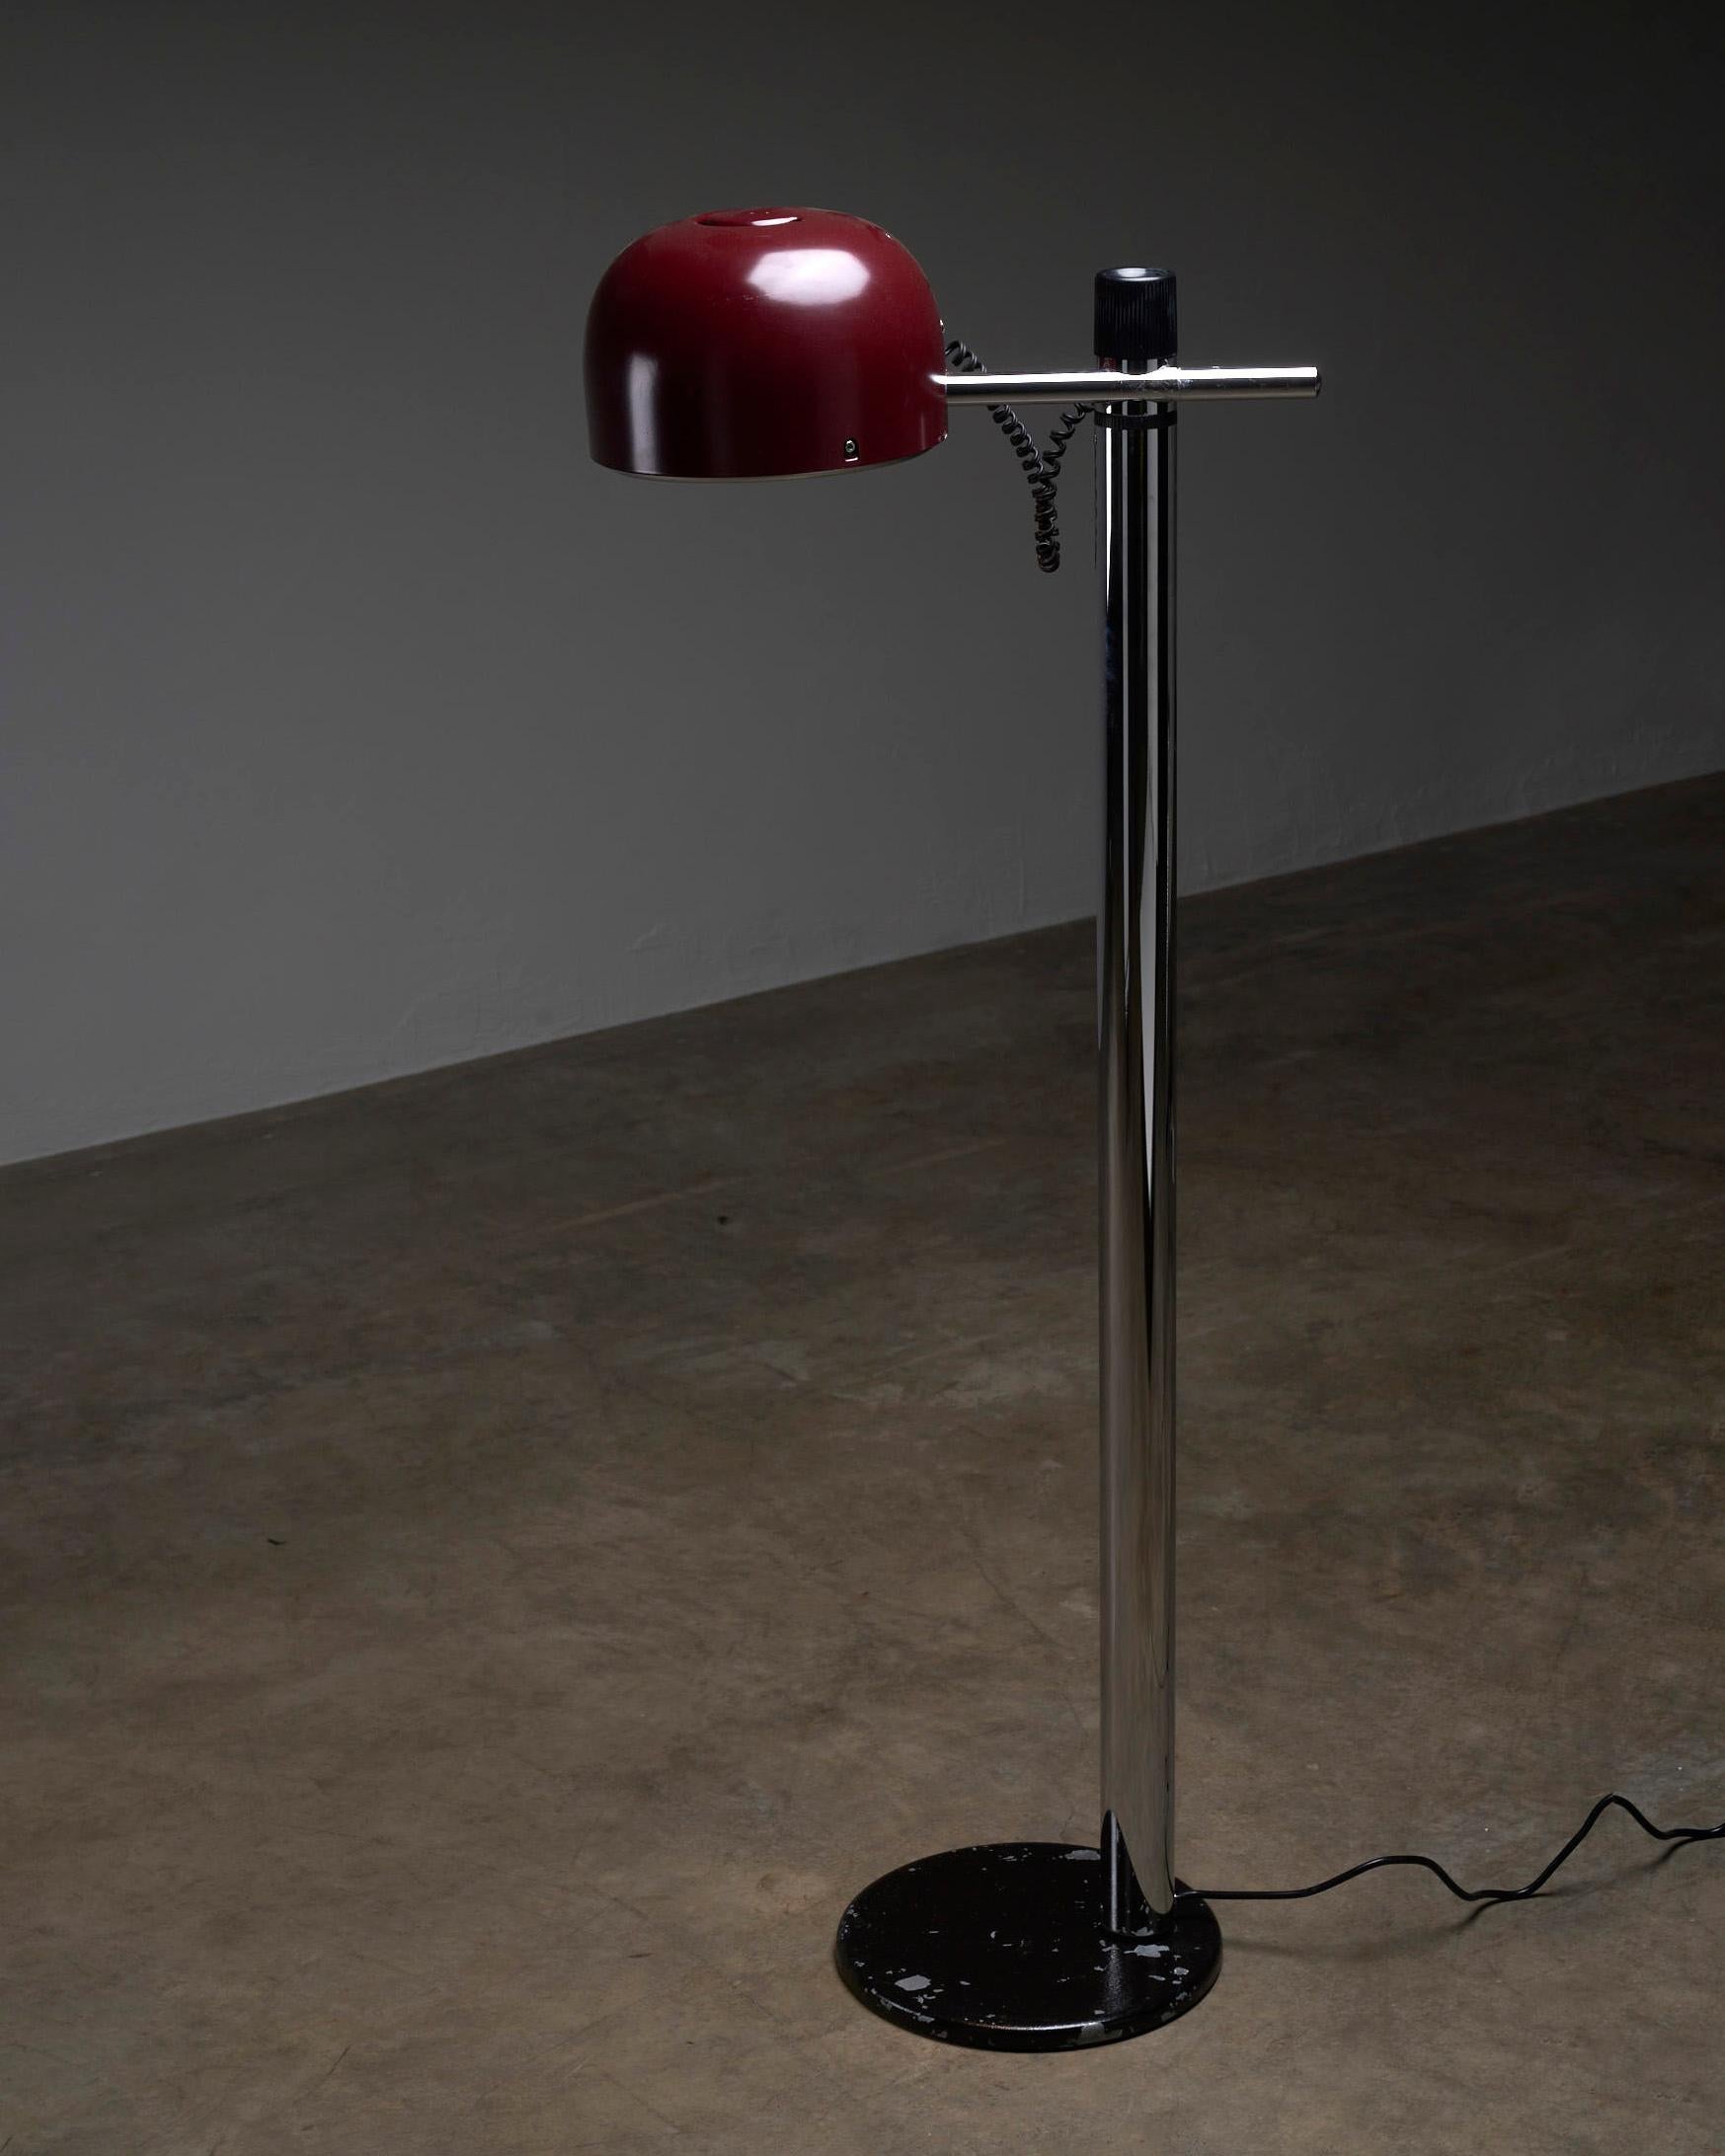 Introduce a touch of elegance and sophistication to your space with the Chrome & Bordeaux Floor Lamp by Enrique Franch for Metalarte. This stunning floor lamp, crafted in Spain, combines sleek chrome accents with a rich bordeaux shade to create a